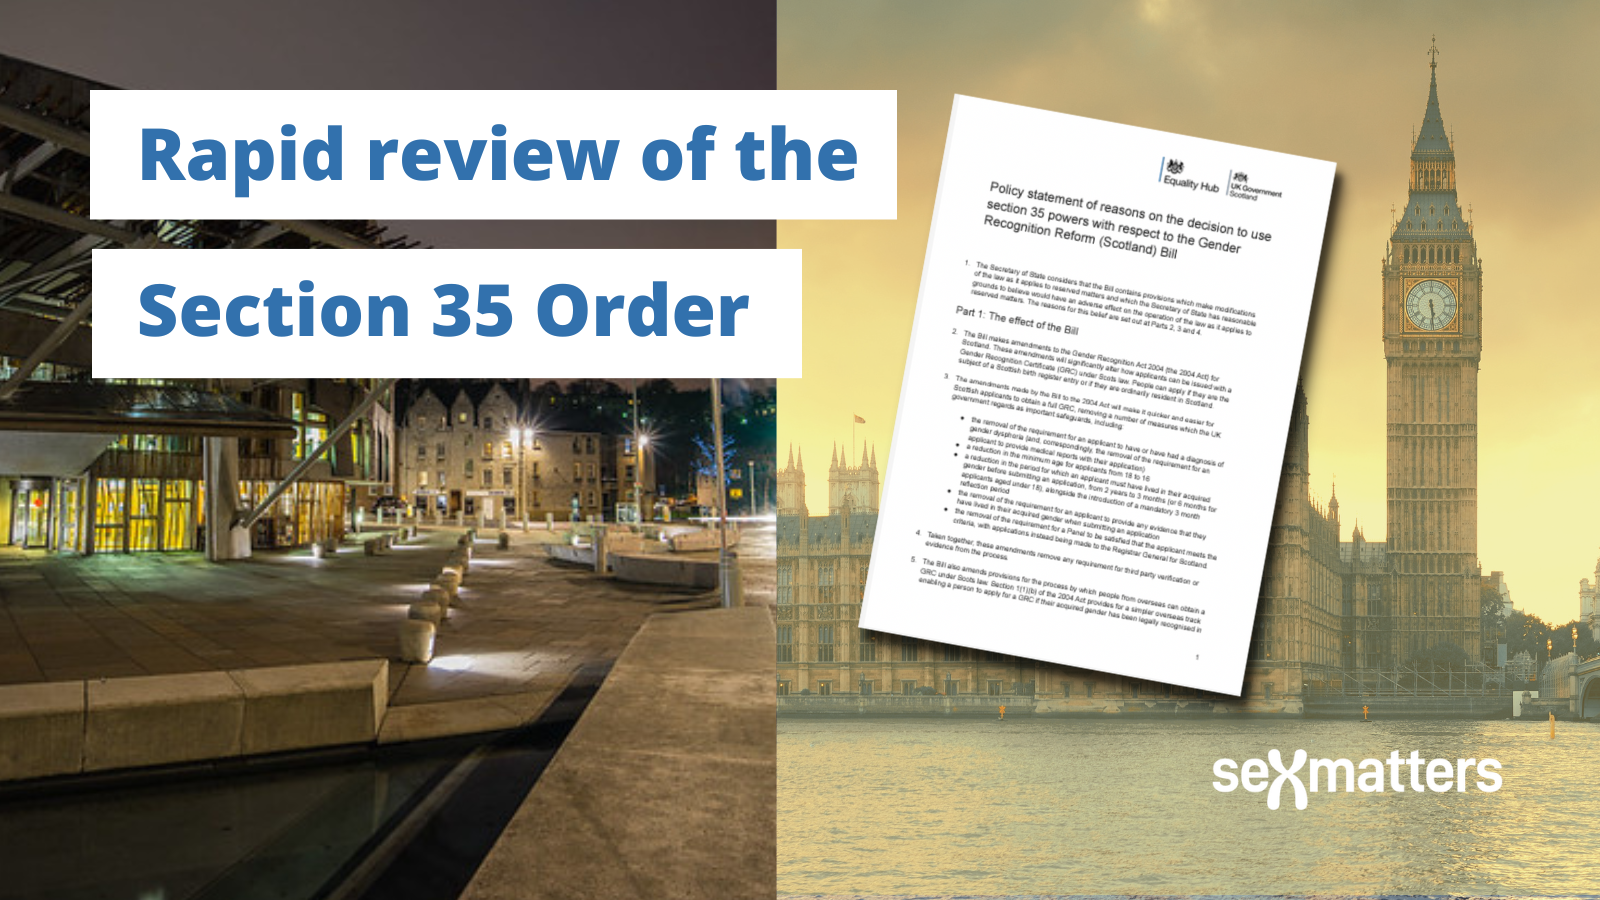 Rapid review of the section 35 order